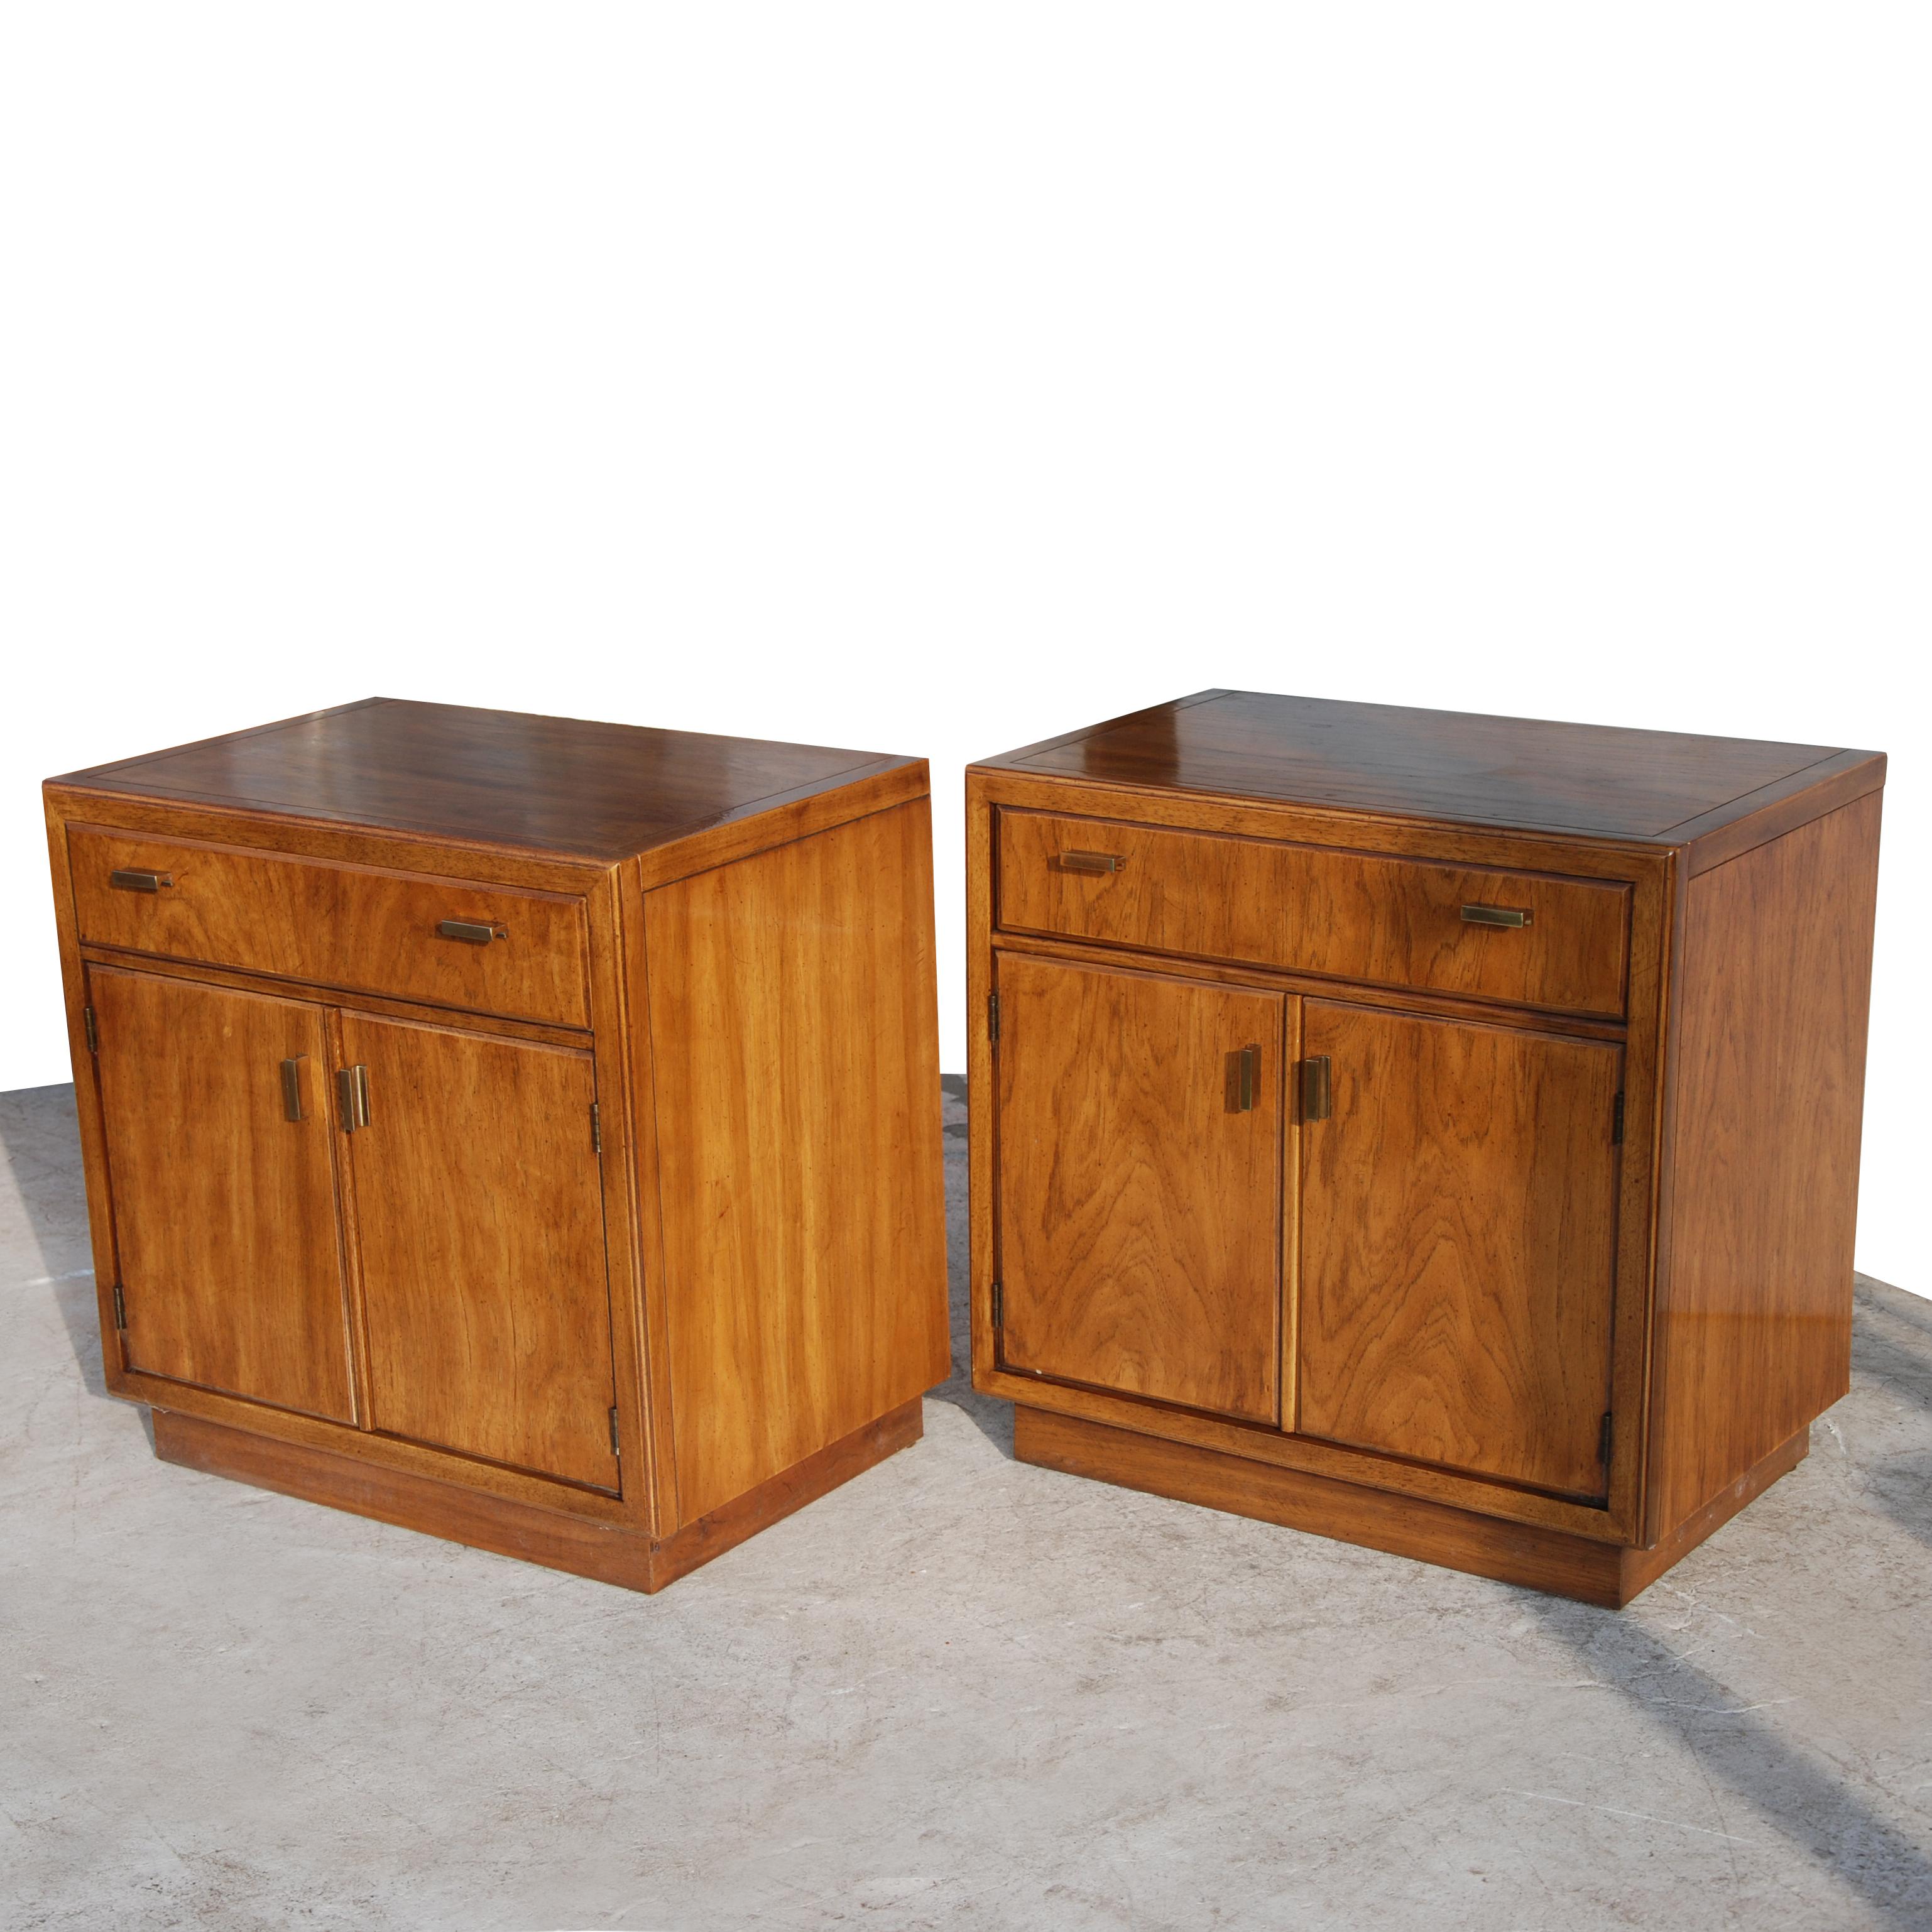 Pair of Drexel Heritage consensus pecan nightstands



1970s Campaign style nightstands made by Drexel Heritage for the Consensus line.


Nightstands in solid Pecan with brass pulls. One drawer with ample storage underneath.
 
 